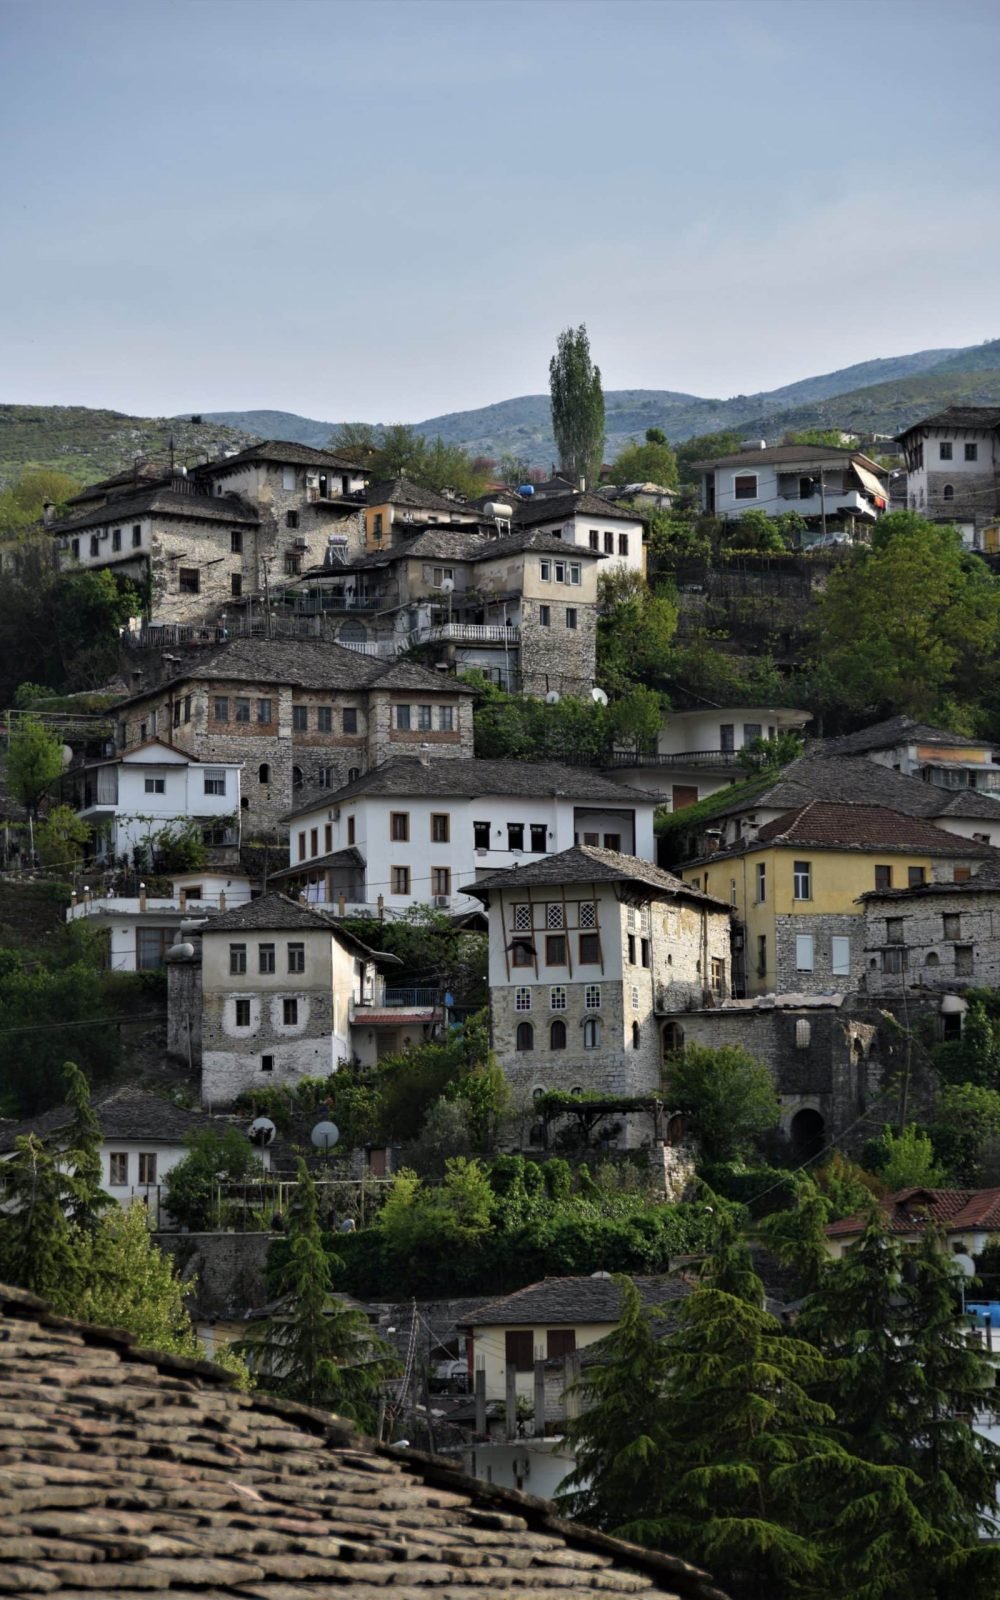 unique Ottoman houses gracing the steep slopes in Gjirokaster